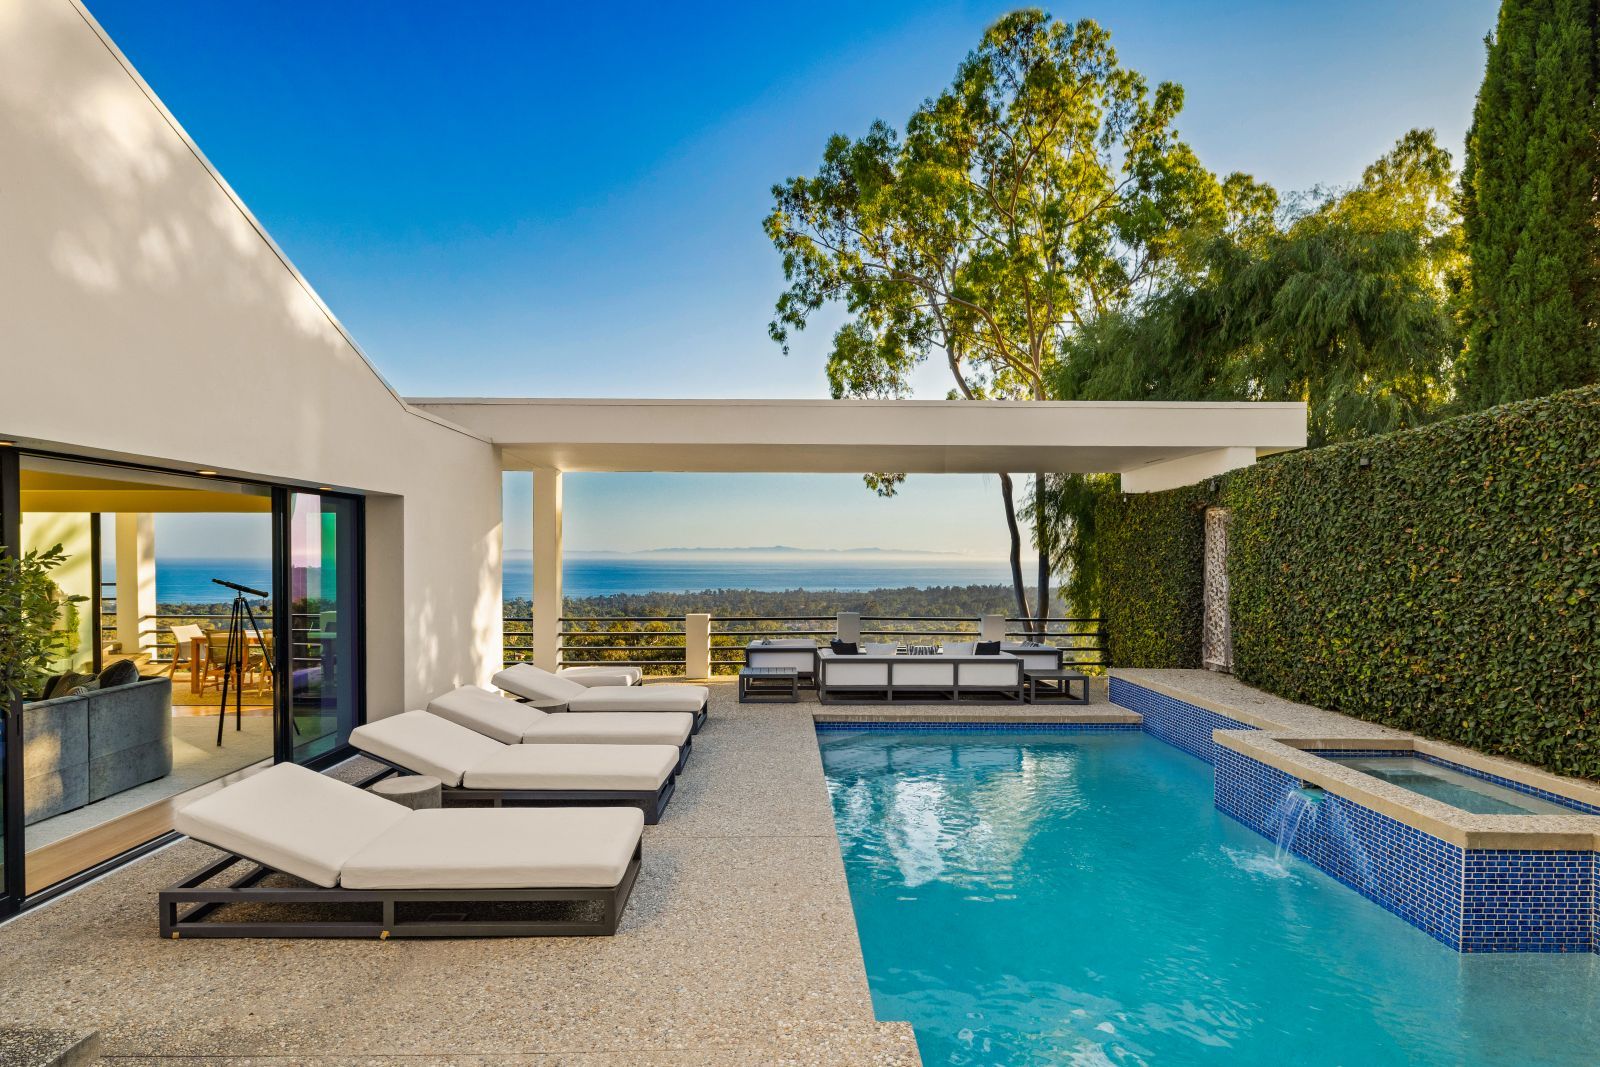 The plunge pool and pool terrace at a classic luxury Modernist home with a dramatic ocean view.